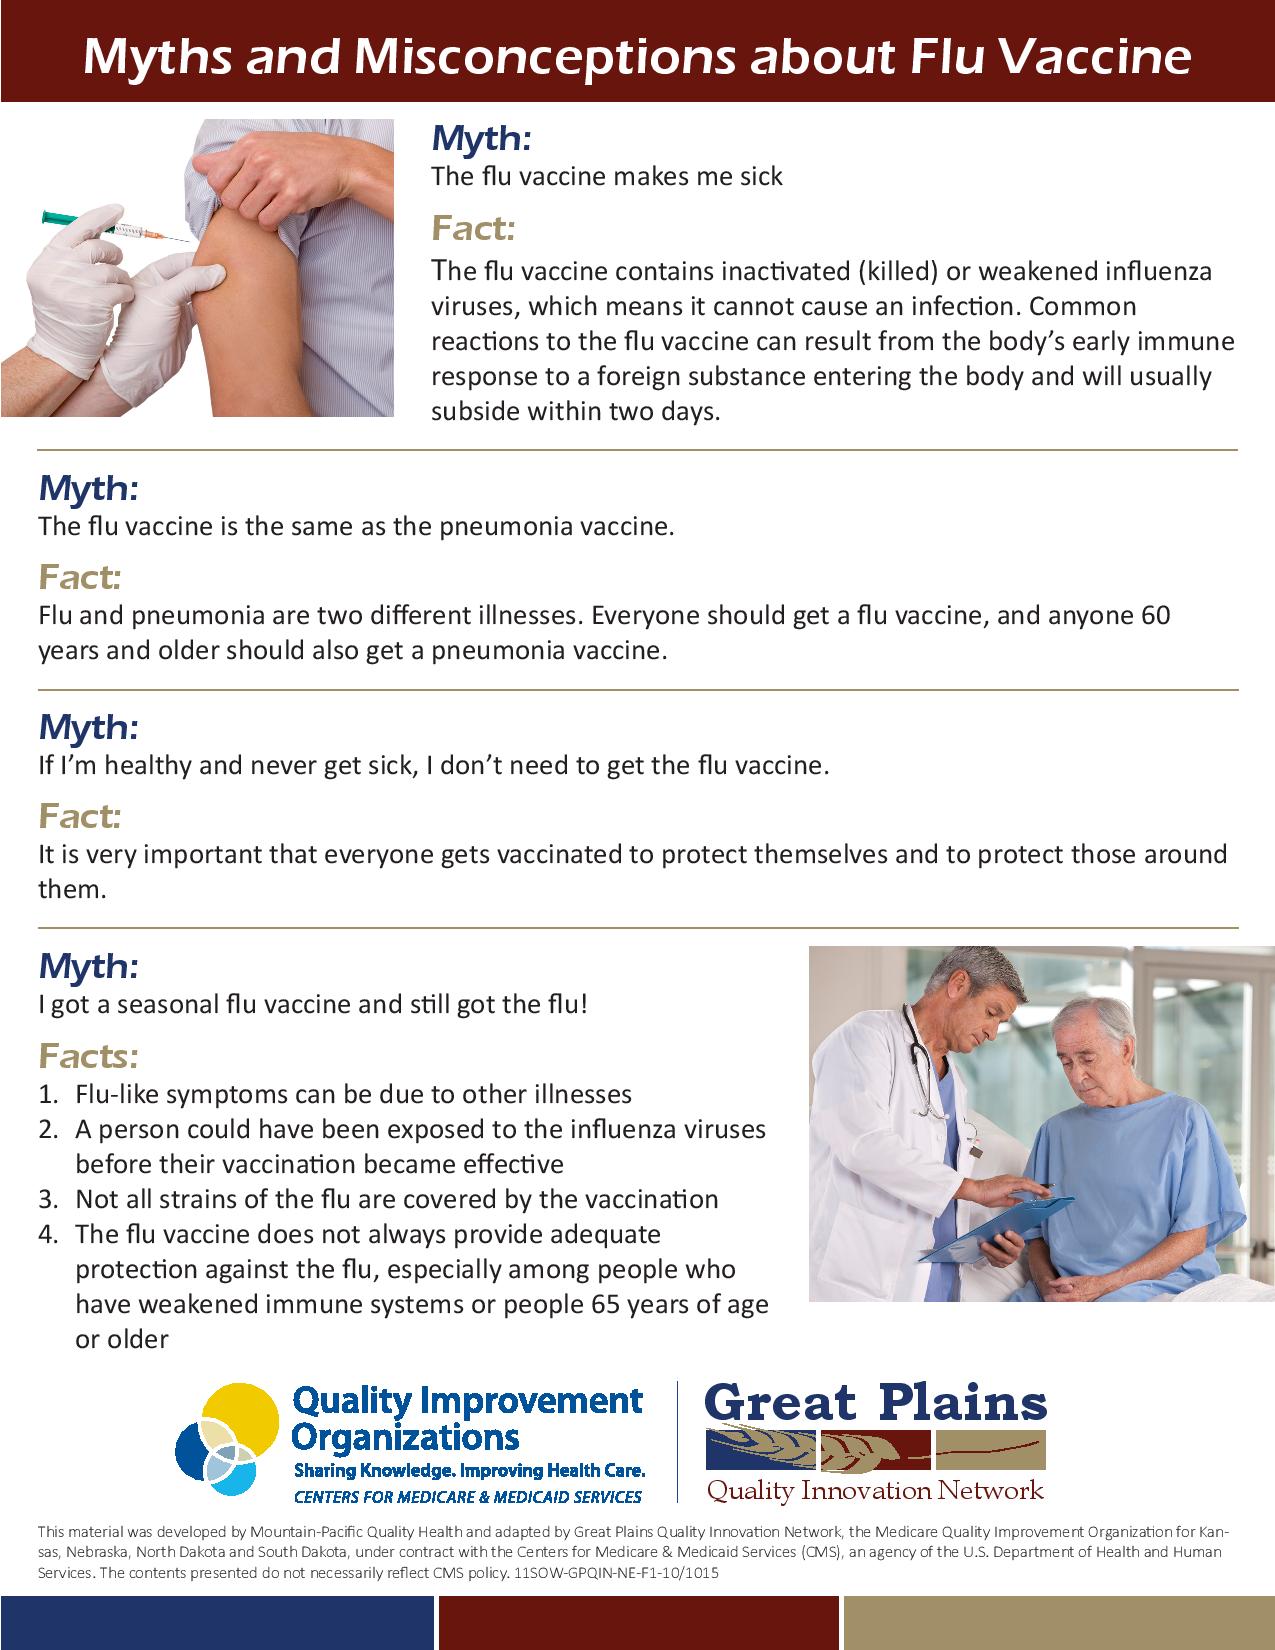 Myths and Misconceptions About the Flu Vaccine Poster